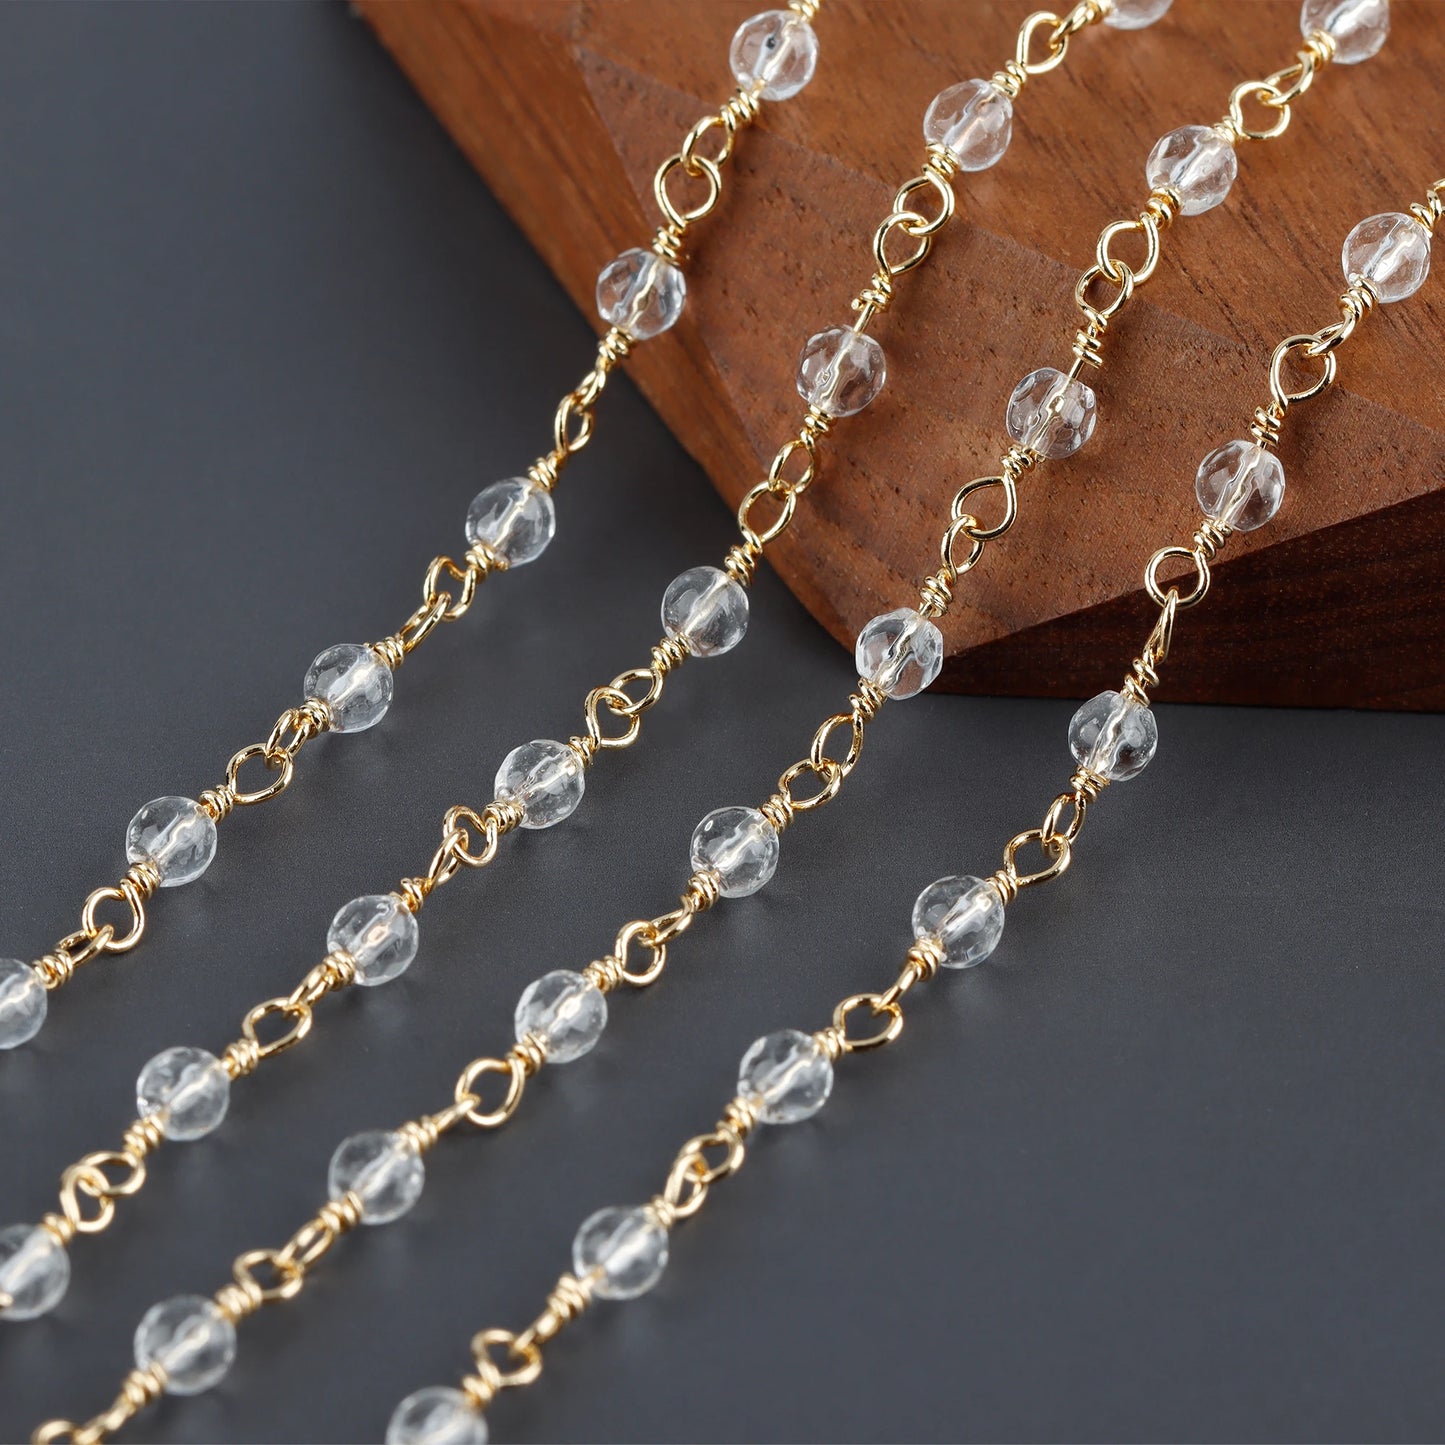 GUFEATHER C188,diy chain,pass REACH,nickel free,18k gold plated,copper,natural stone,diy bracelet necklace,jewelry making,1m/lot